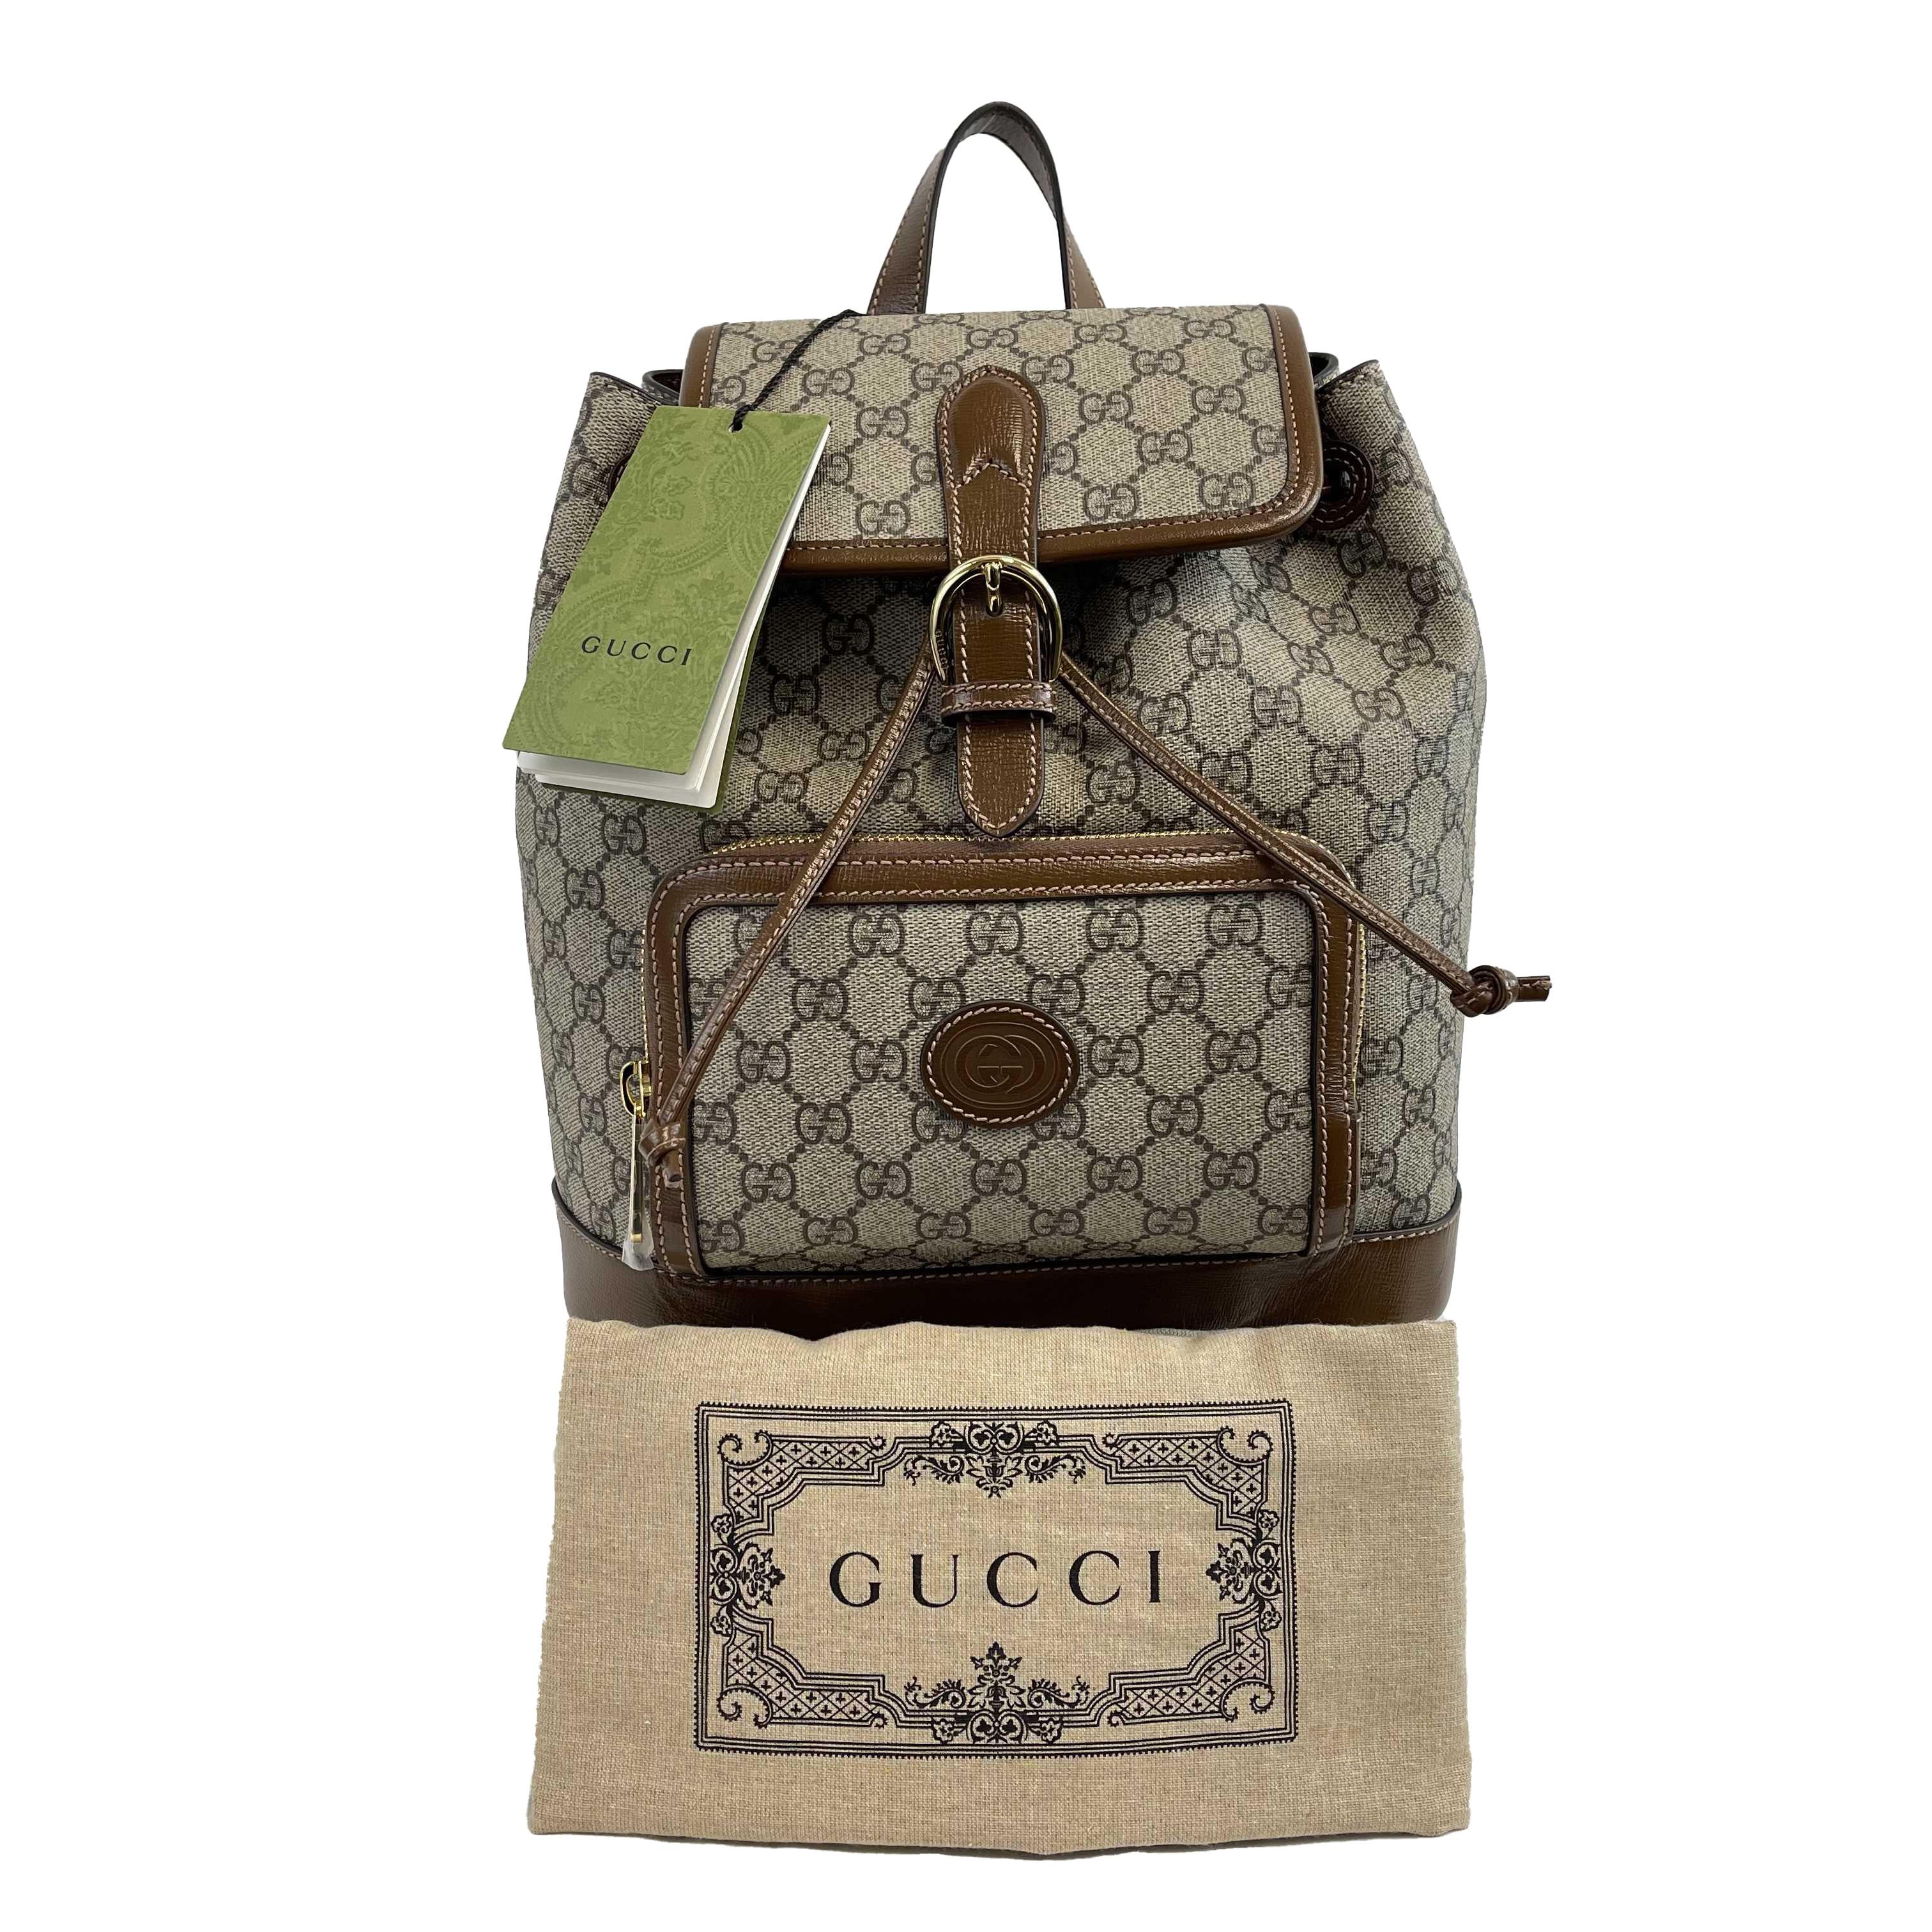 Gray Gucci - NEW Backpack With Interlocking G - Beige / Brown Monogram Backpack